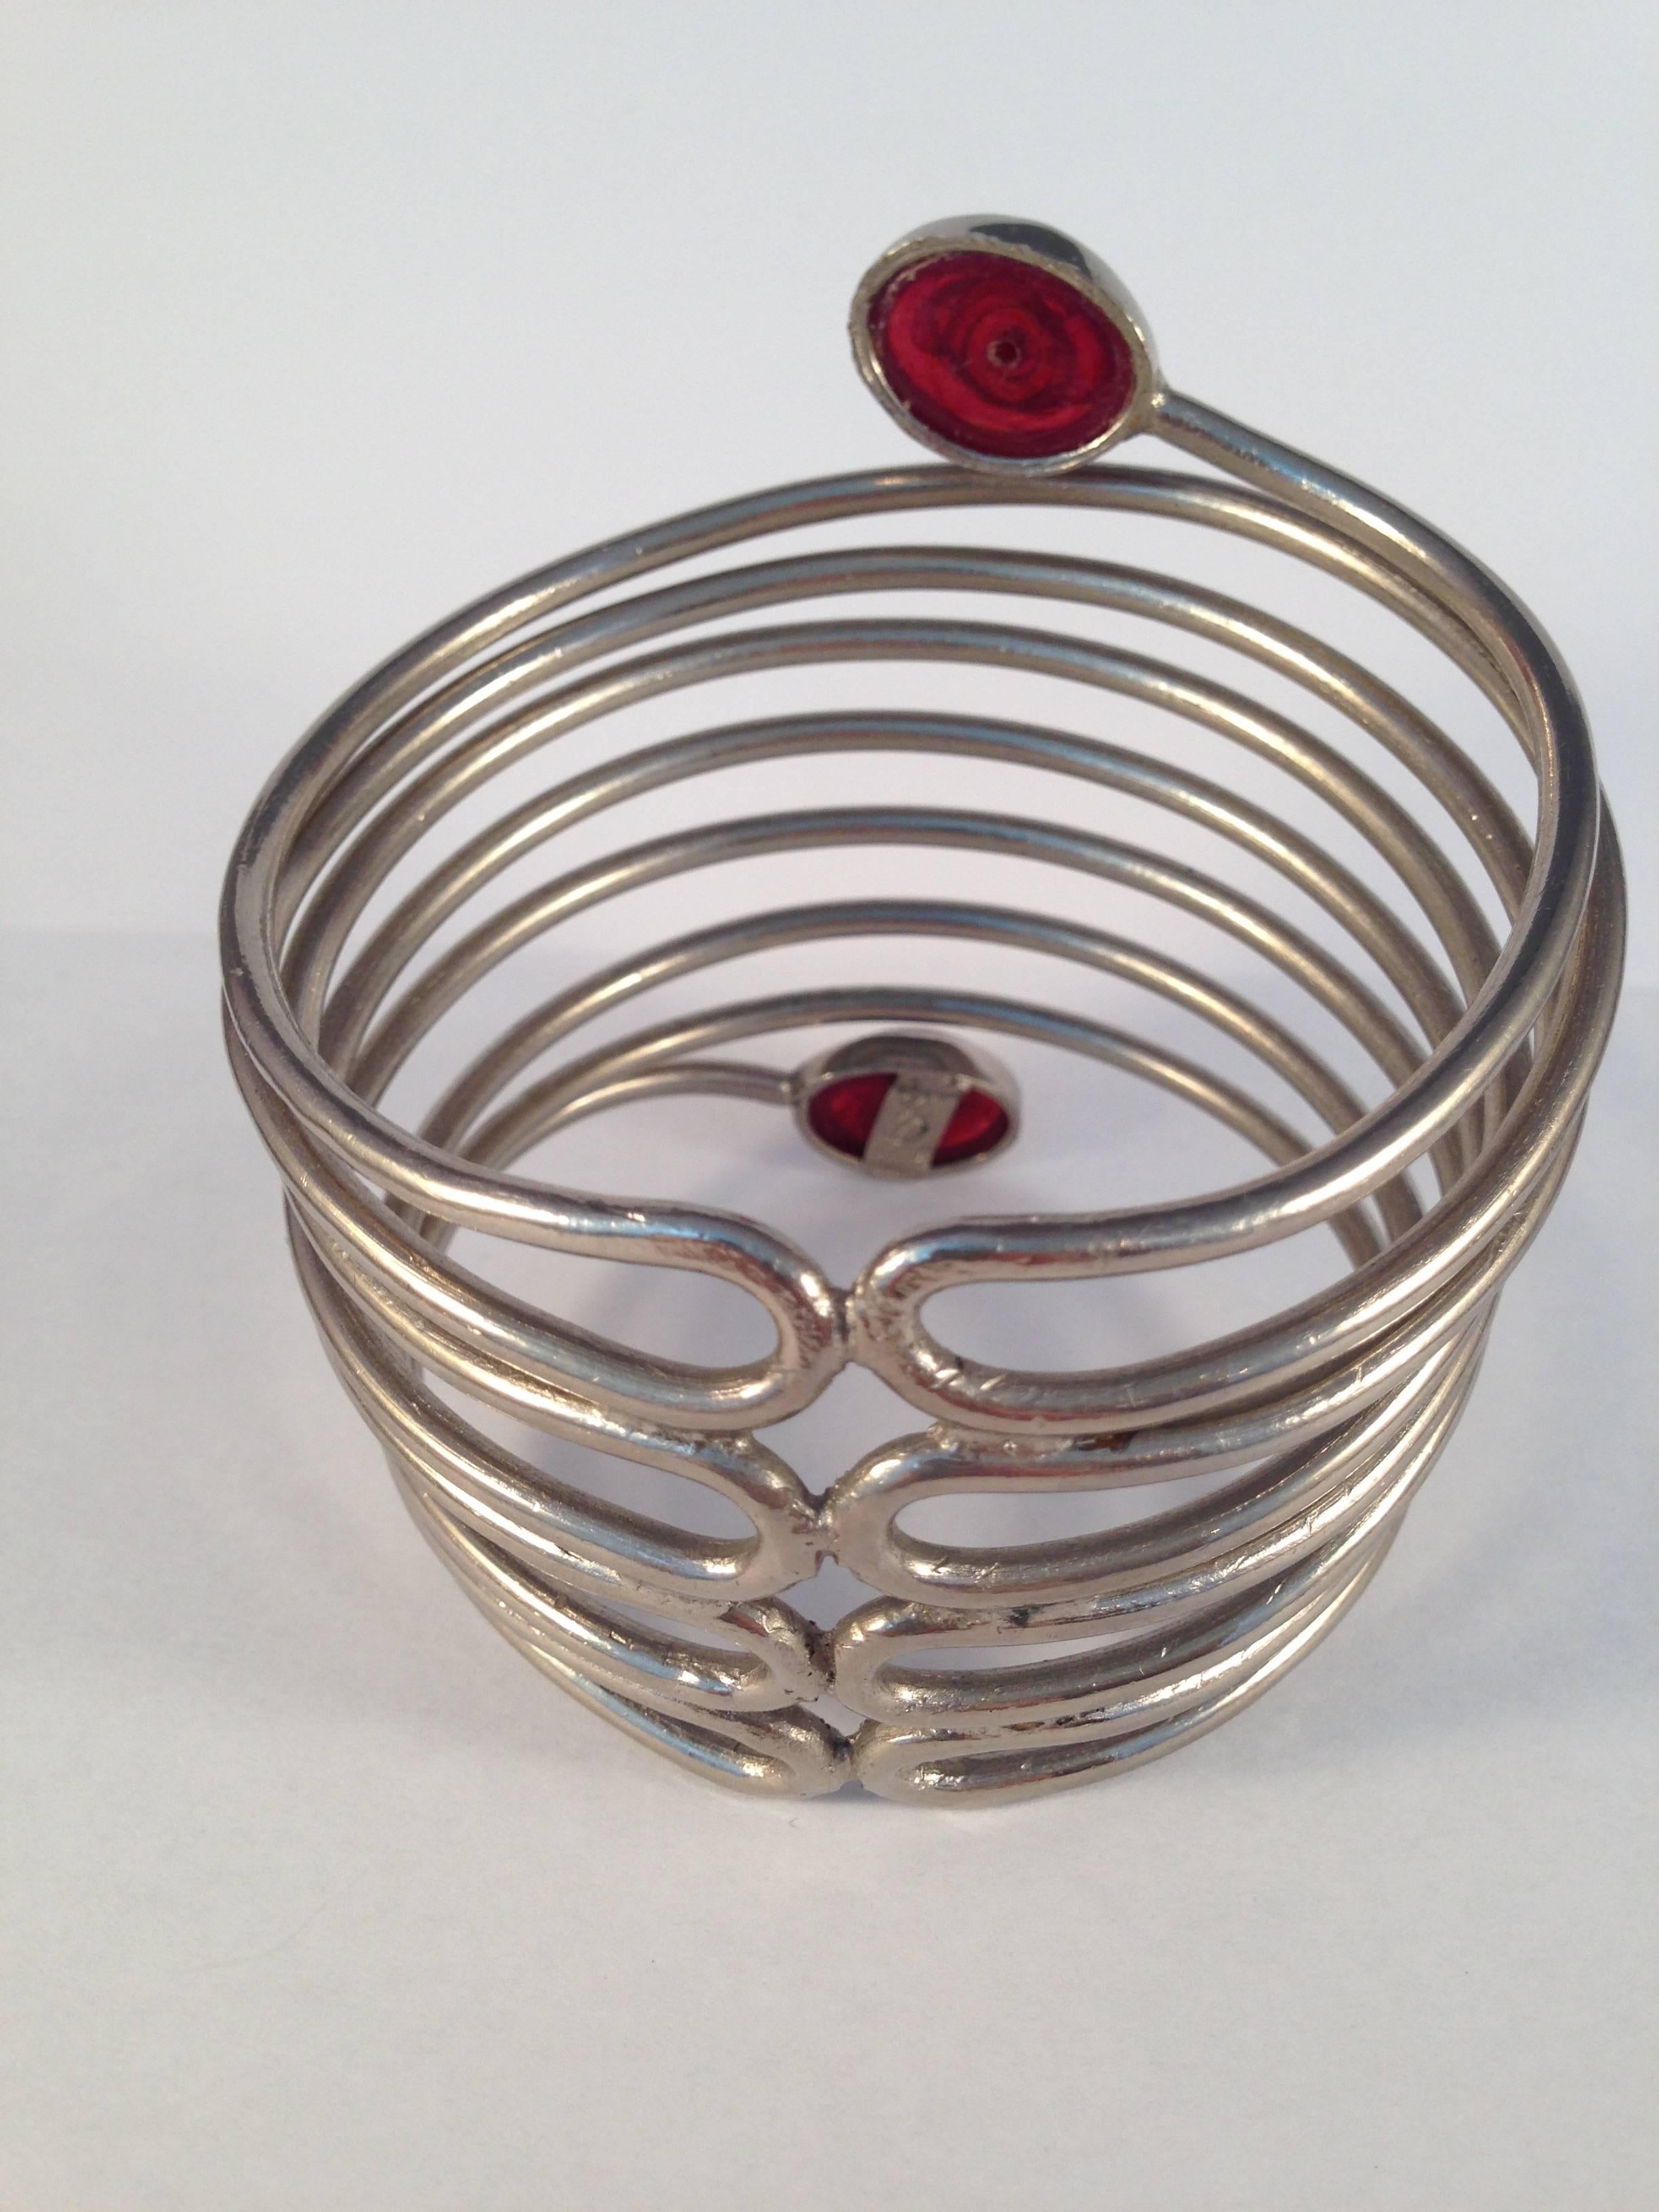 Yves Saint Laurent Cuff Bracelet Gripoix Silver-Tone Spiral 1970s  In Excellent Condition For Sale In Chicago, IL